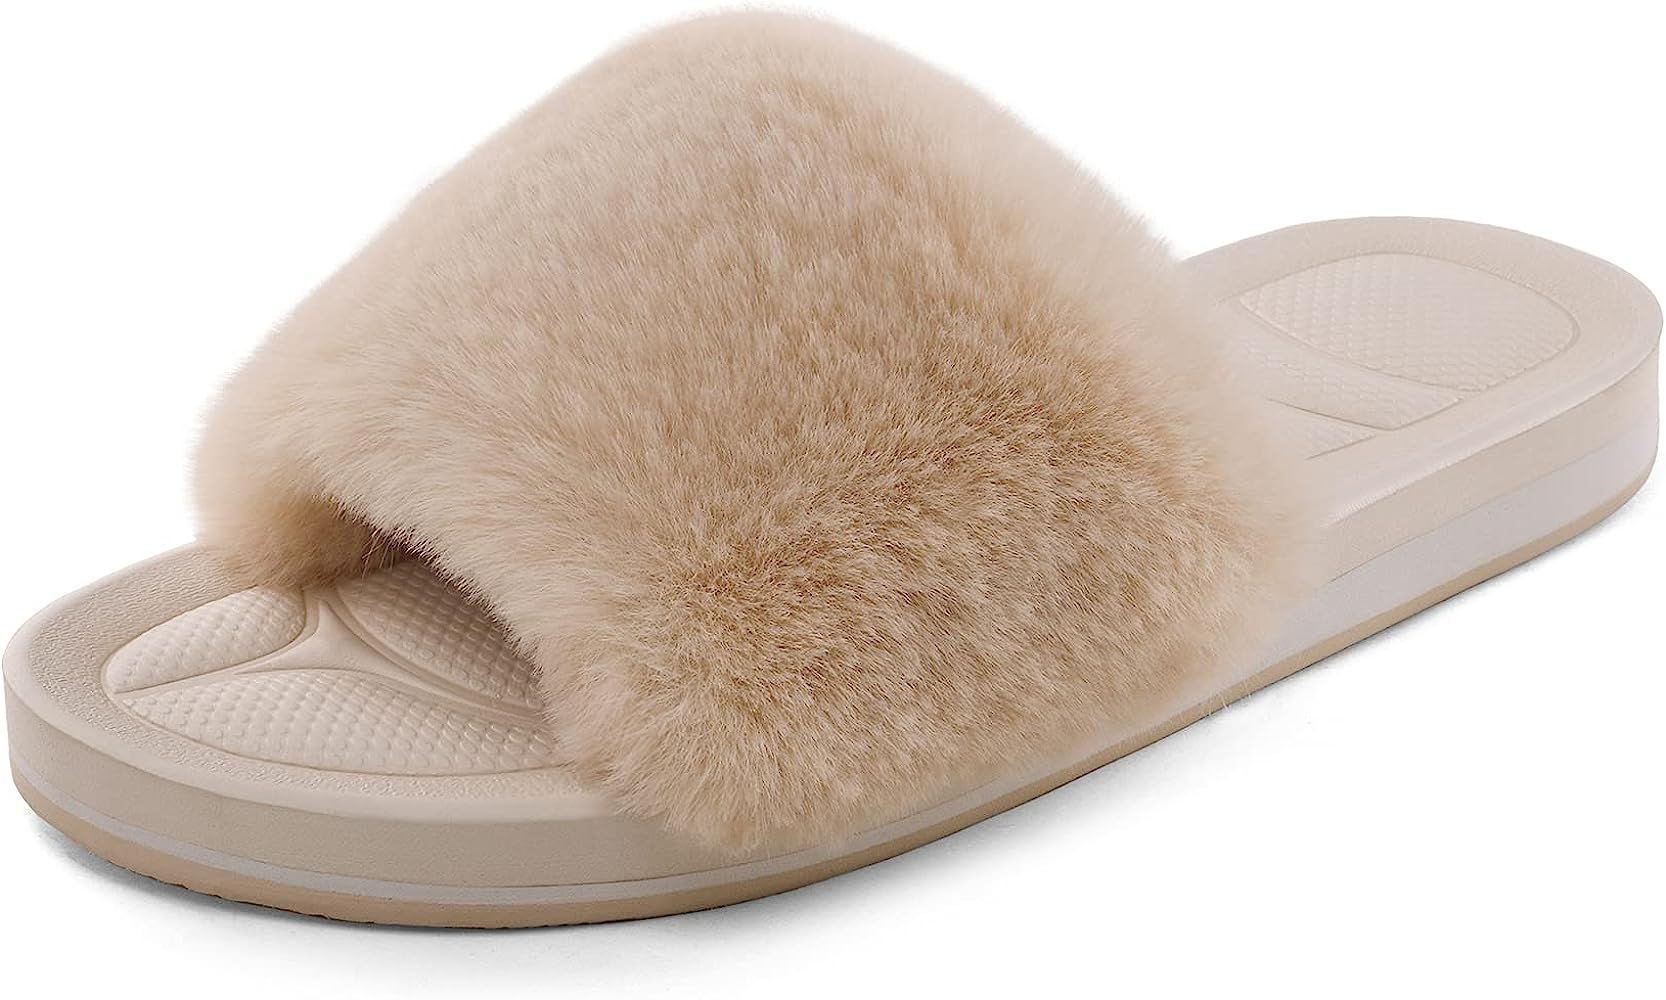 DREAM PAIRS Women's Fuzzy House Slippers Fluffy Fur Slides Open Toe | Amazon (US)